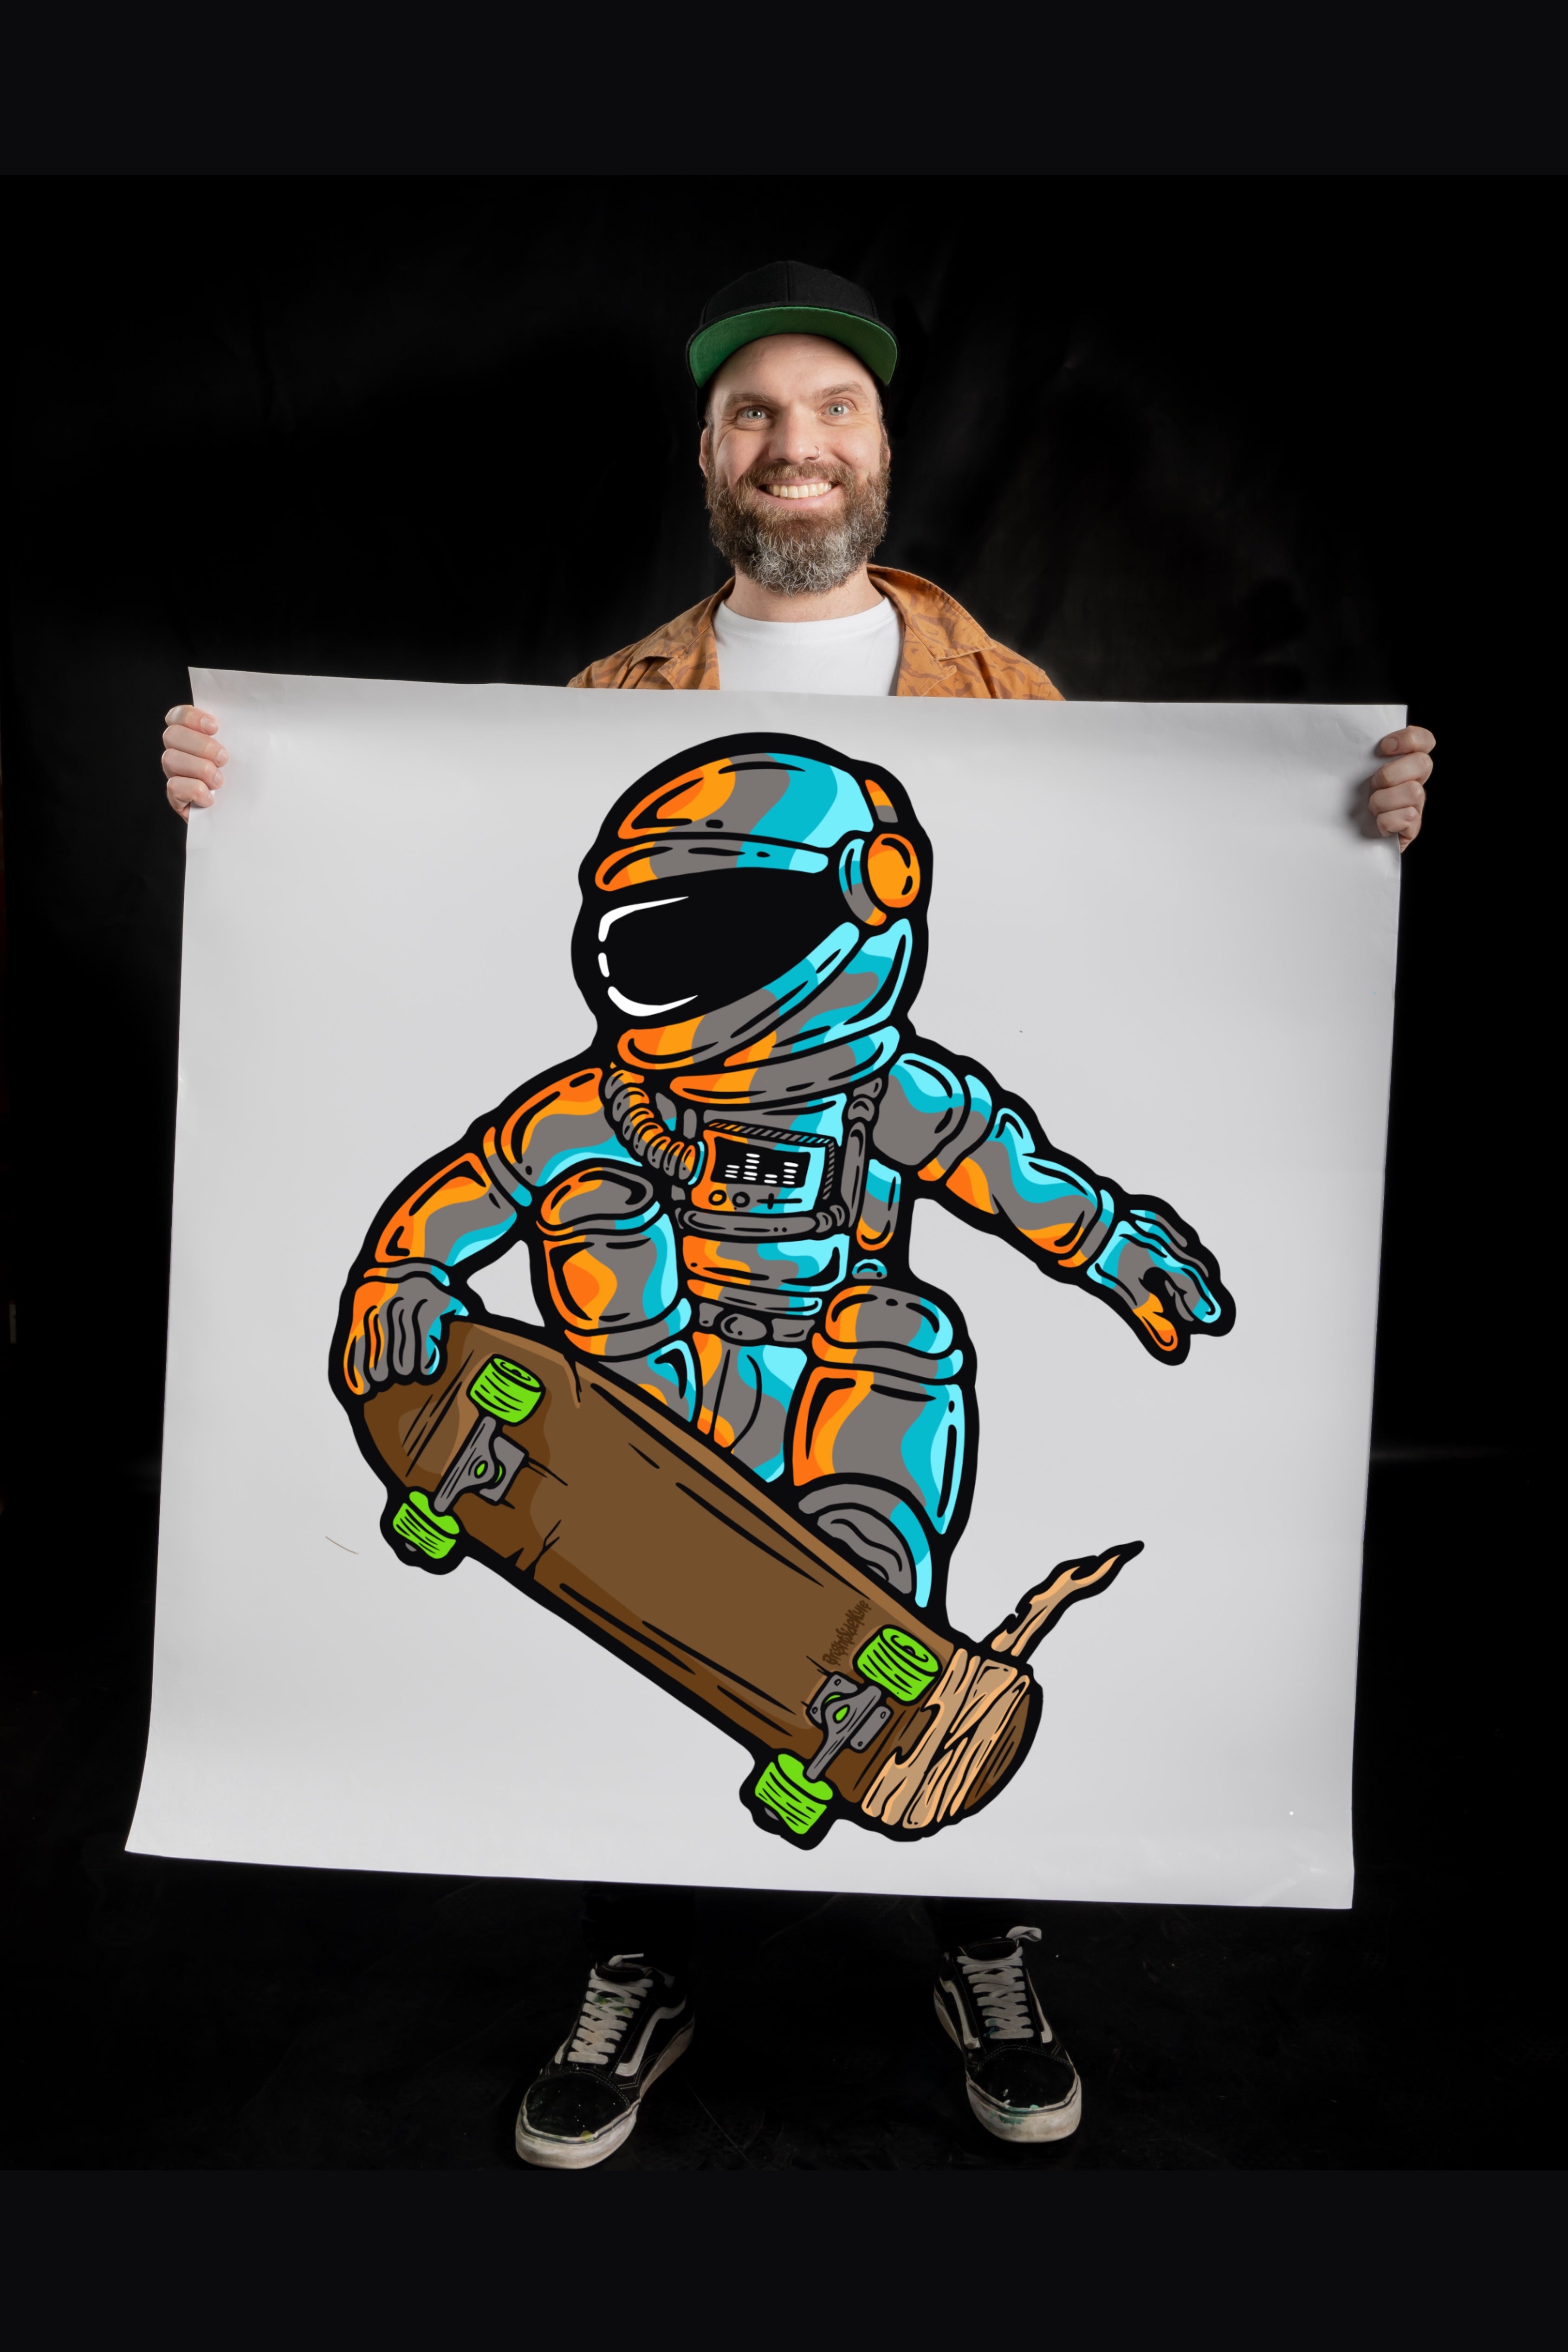 Wall Art Decal - Astro Skater